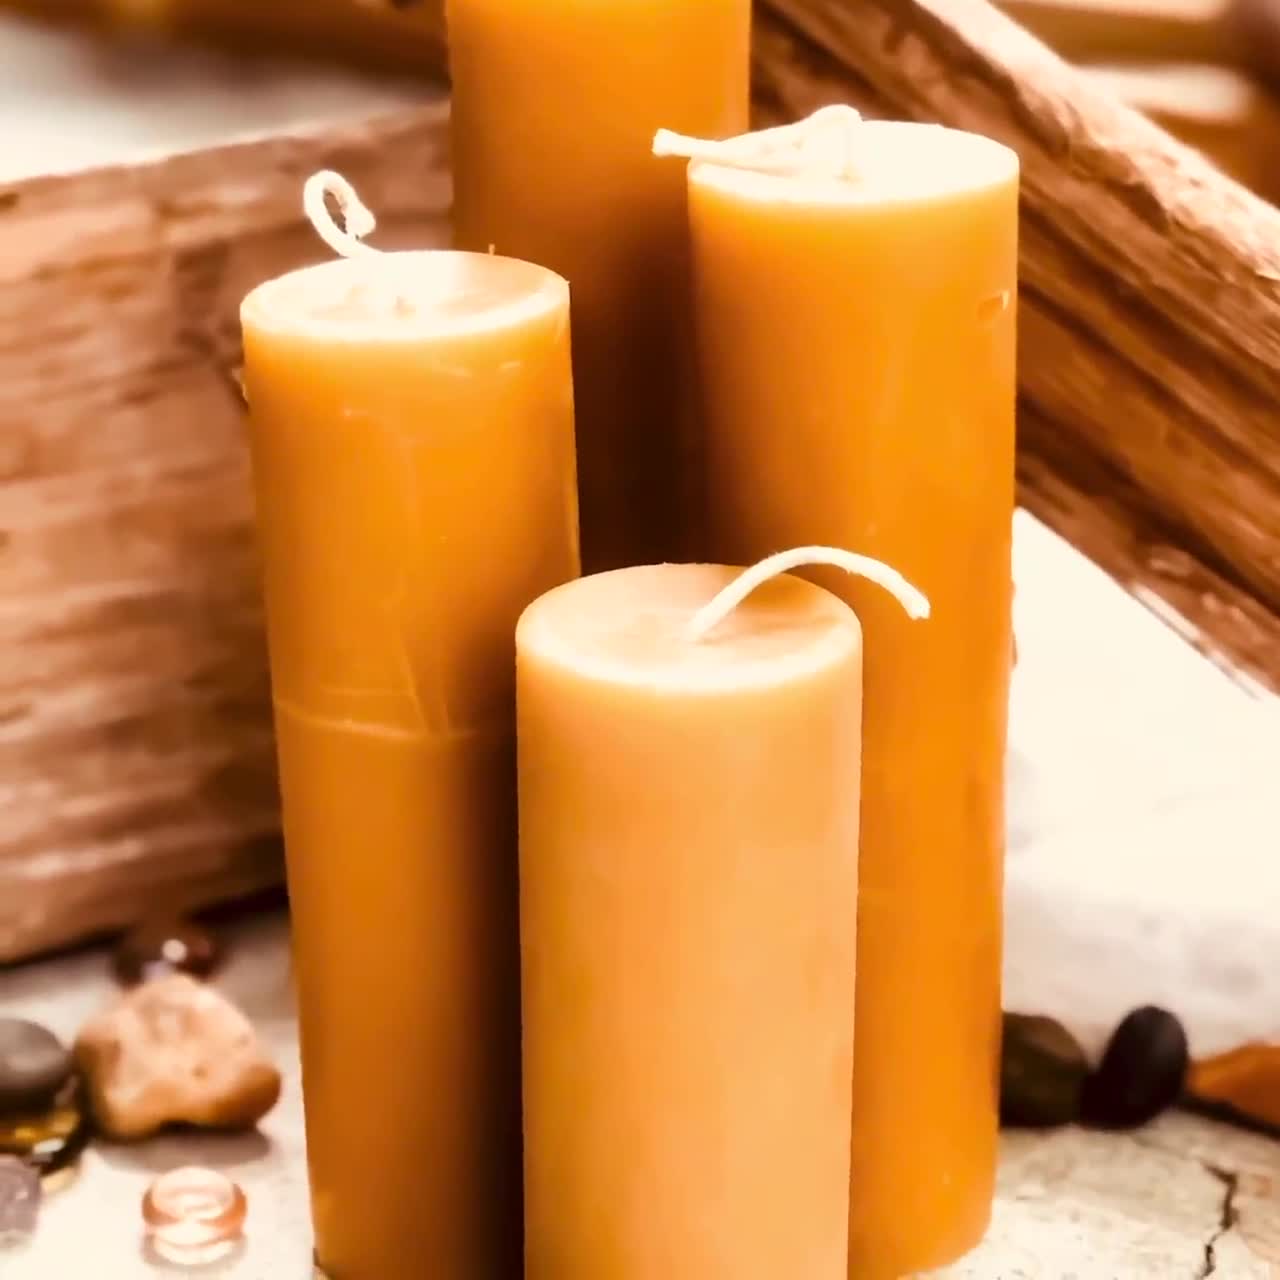 Set of 4 100% Pure Beeswax Pillar Candles-2 Wide Organic Beeswax